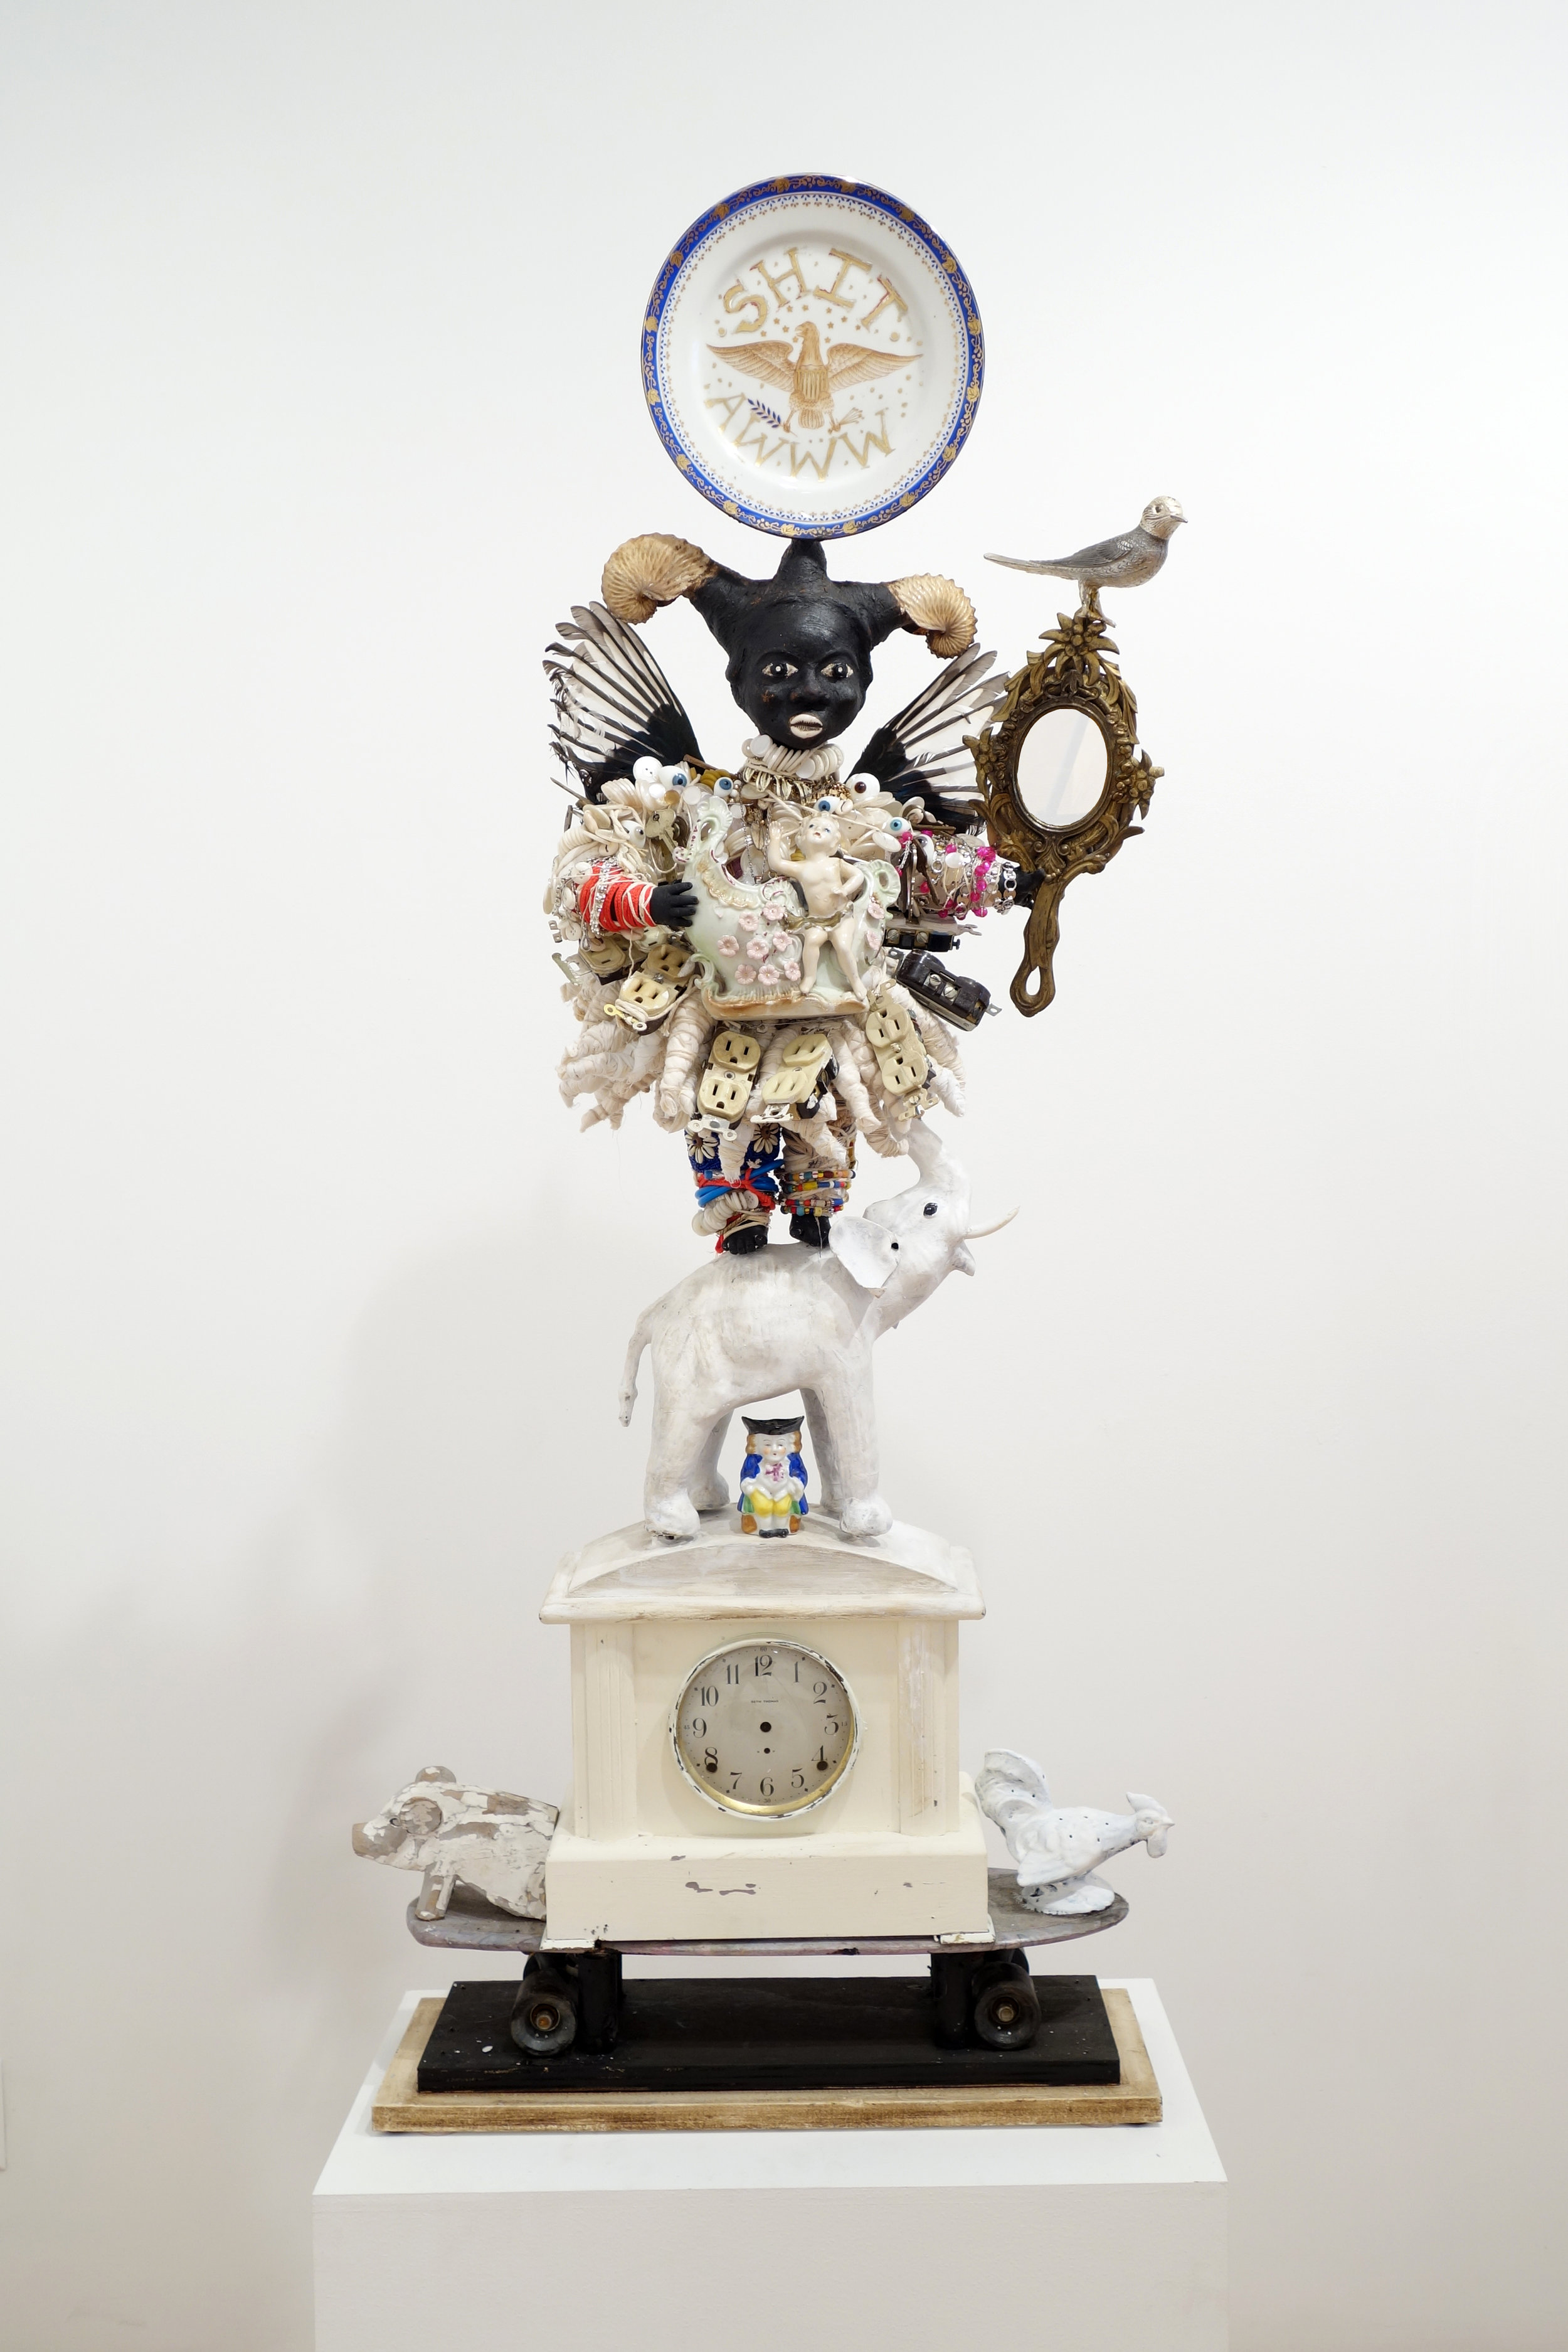 Resilience, 2013, Mixed-media assemblage 55 x 21 x 11 3/4 inches, © Vanessa German, courtesy of the artist and Pavel Zoubok Gallery, New York.